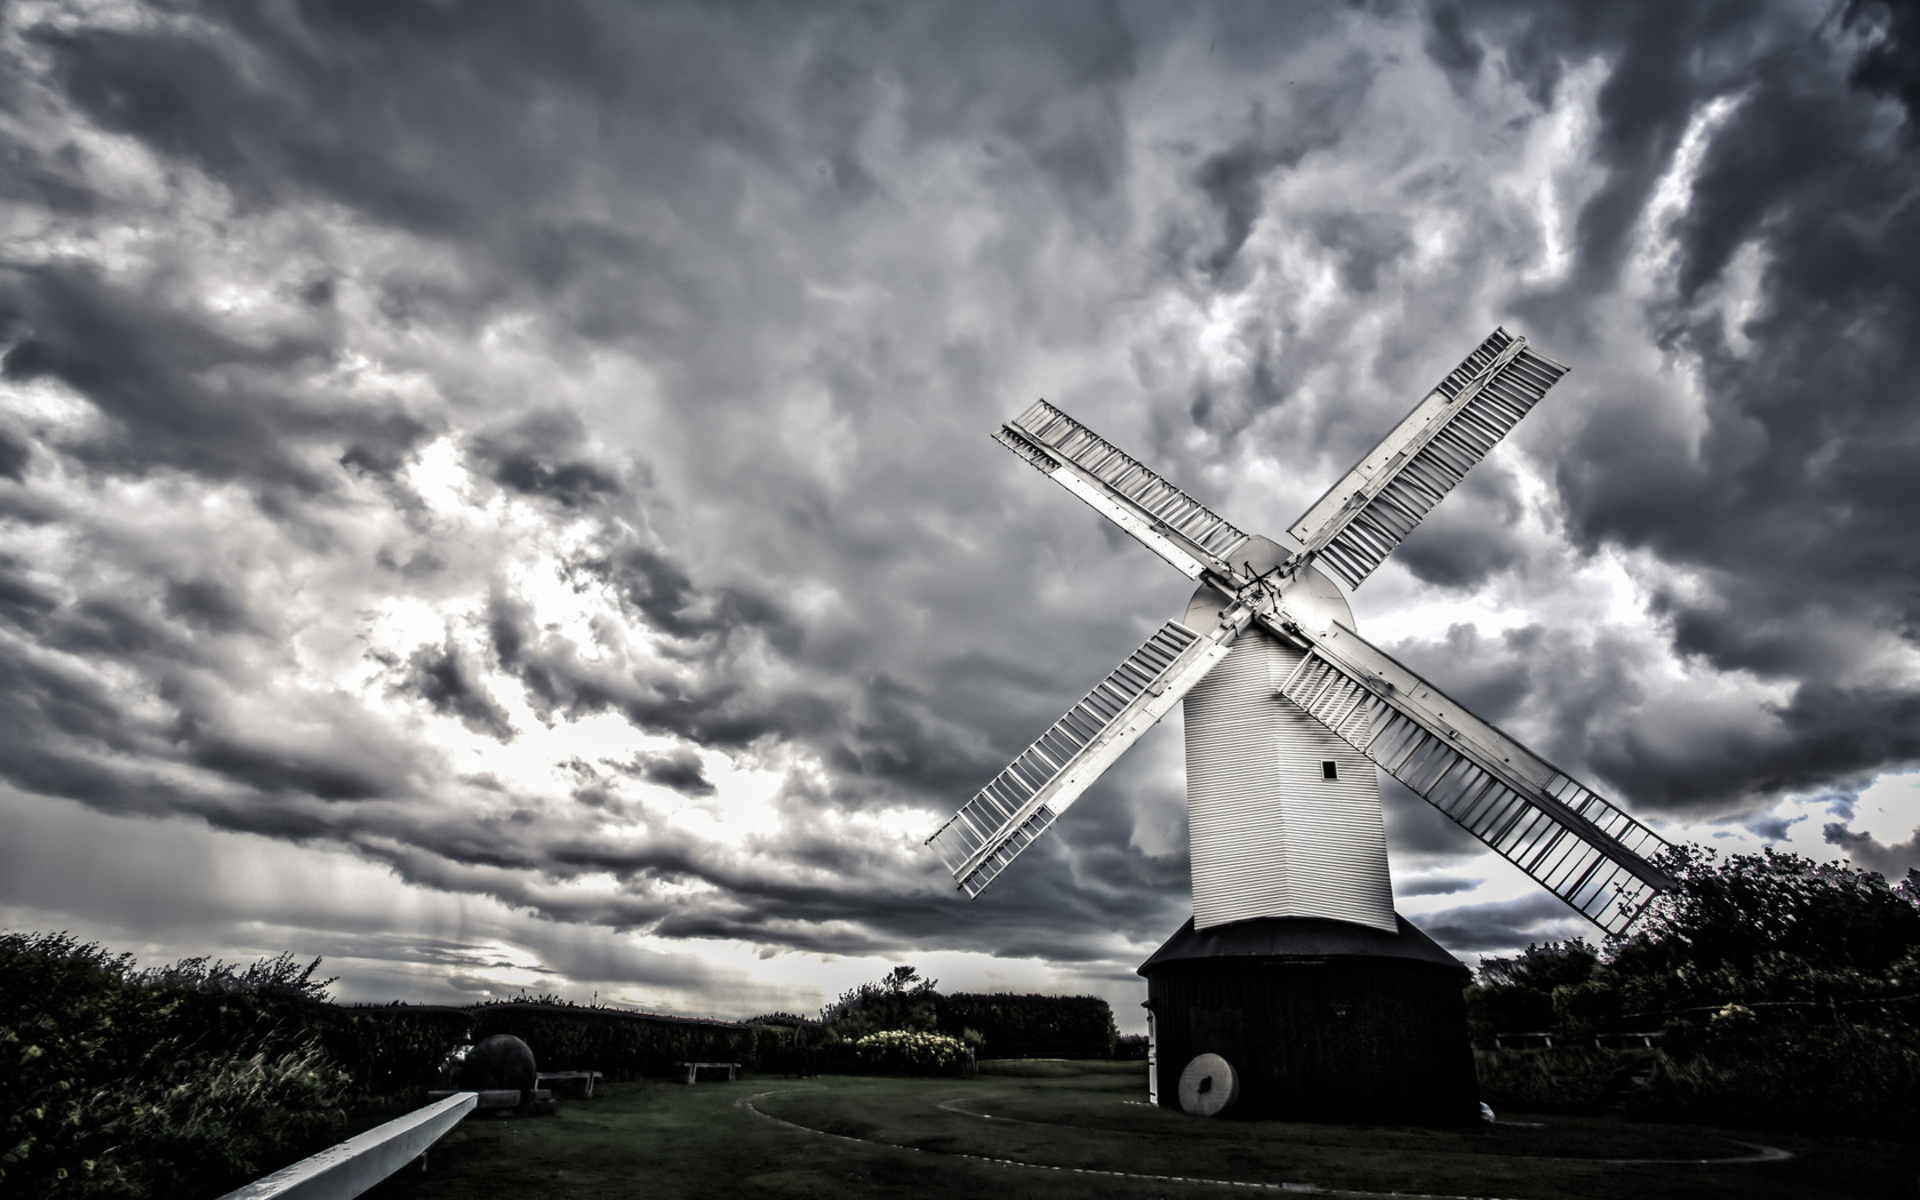 windmill, World, Architecture, Sail, Wind, Buildings, Fence, Nature, Landscapes, Sky, Clouds, Hdr, Black, White, Monochrome Wallpaper